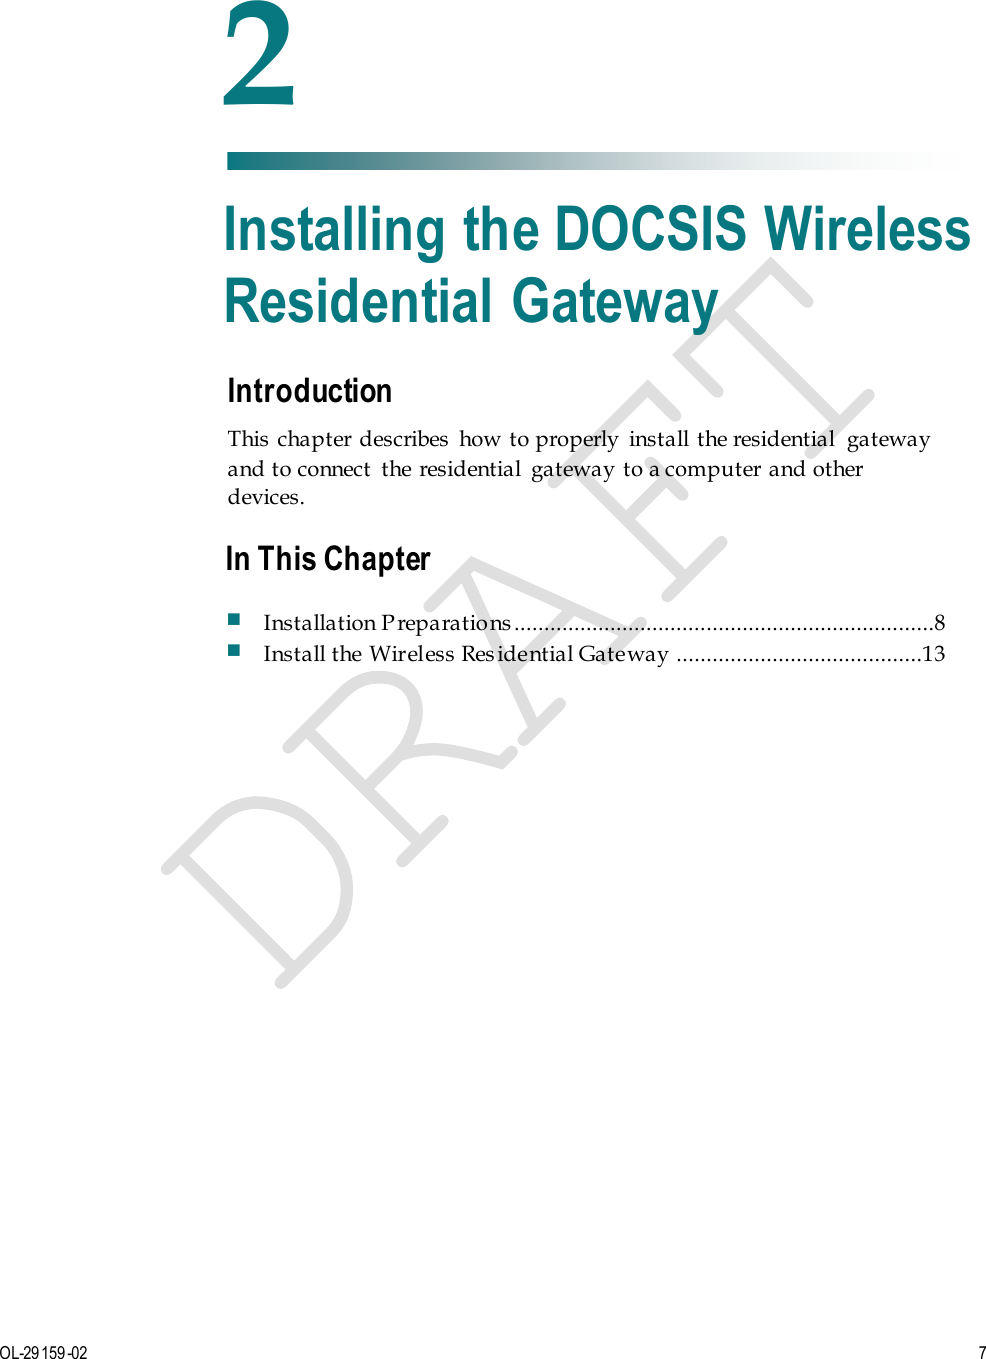   OL-29159-02  7  Introduction This  chapter  describes  how to properly  install the residential  gateway and to connect  the residential  gateway to a computer and other devices.    2 Chapter 2 Installing the DOCSIS Wireless Residential Gateway In This Chapter  Installation P reparations ......................................................................8  Install the Wireless Res idential Gateway  .........................................13 